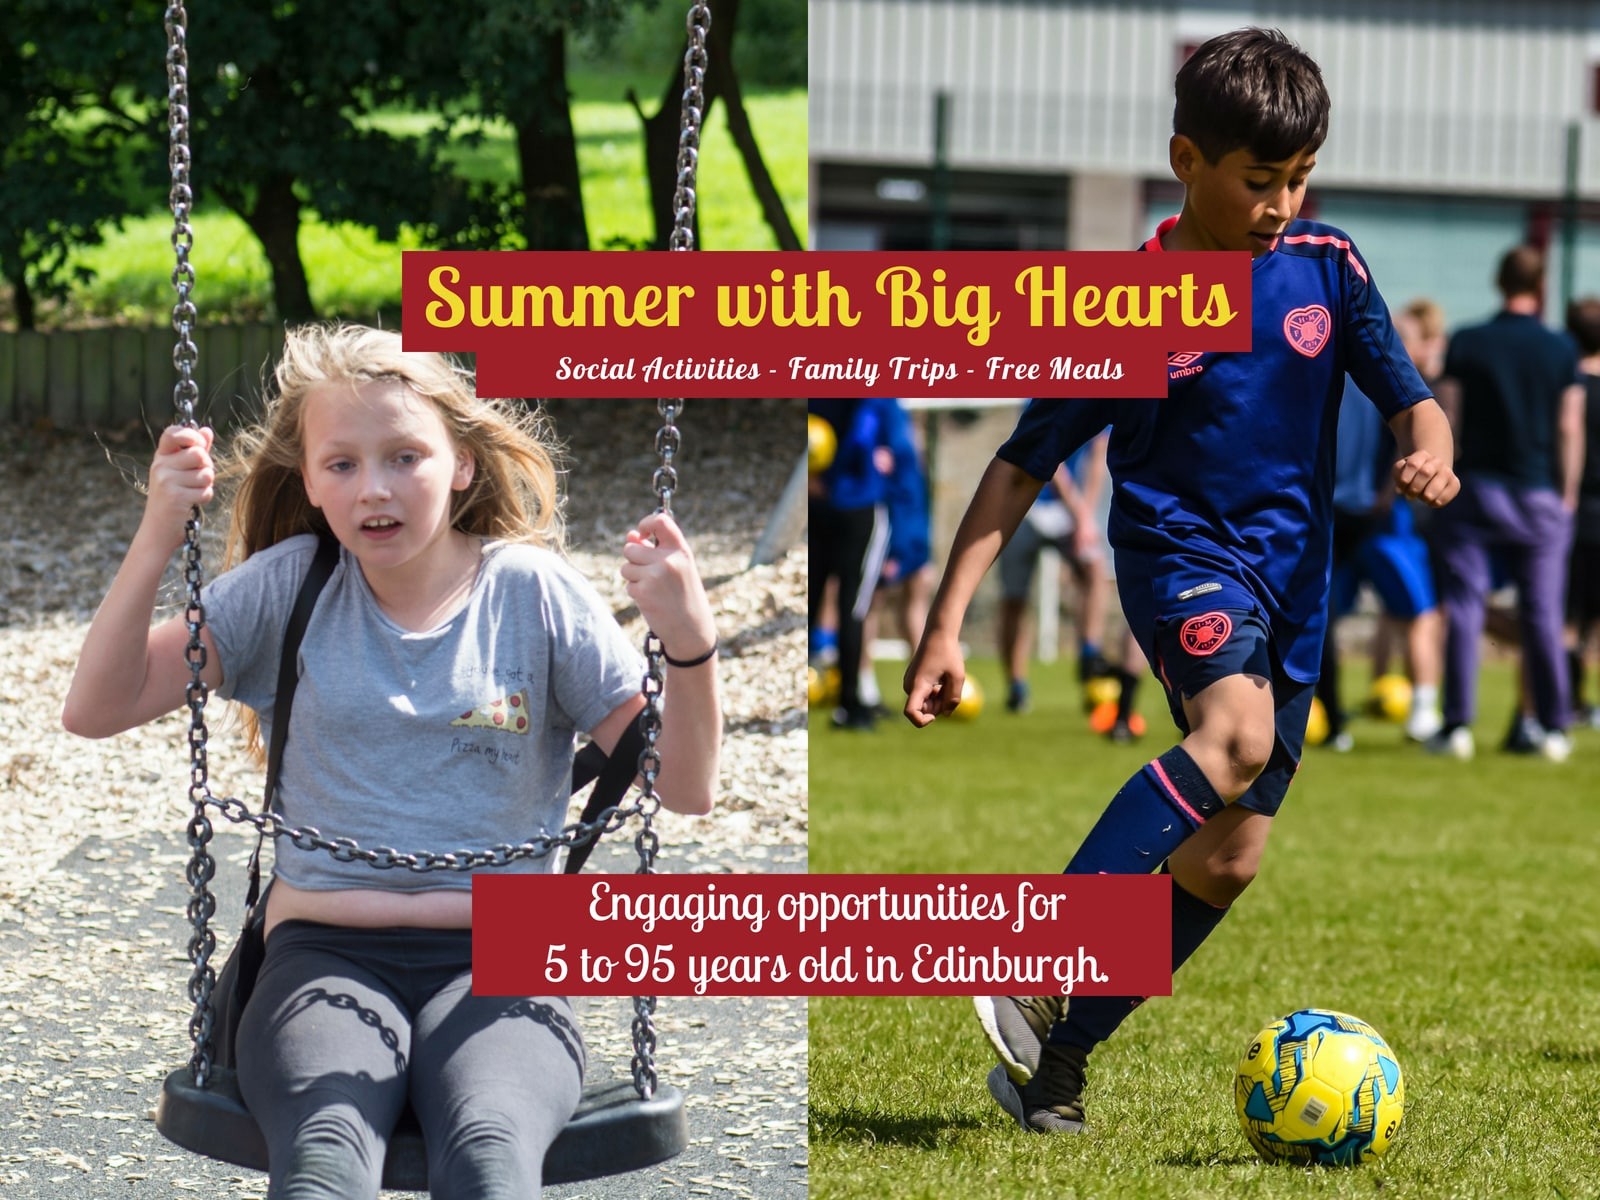  » Summer with Big Hearts: engaging activities for 5 to 95 years old!